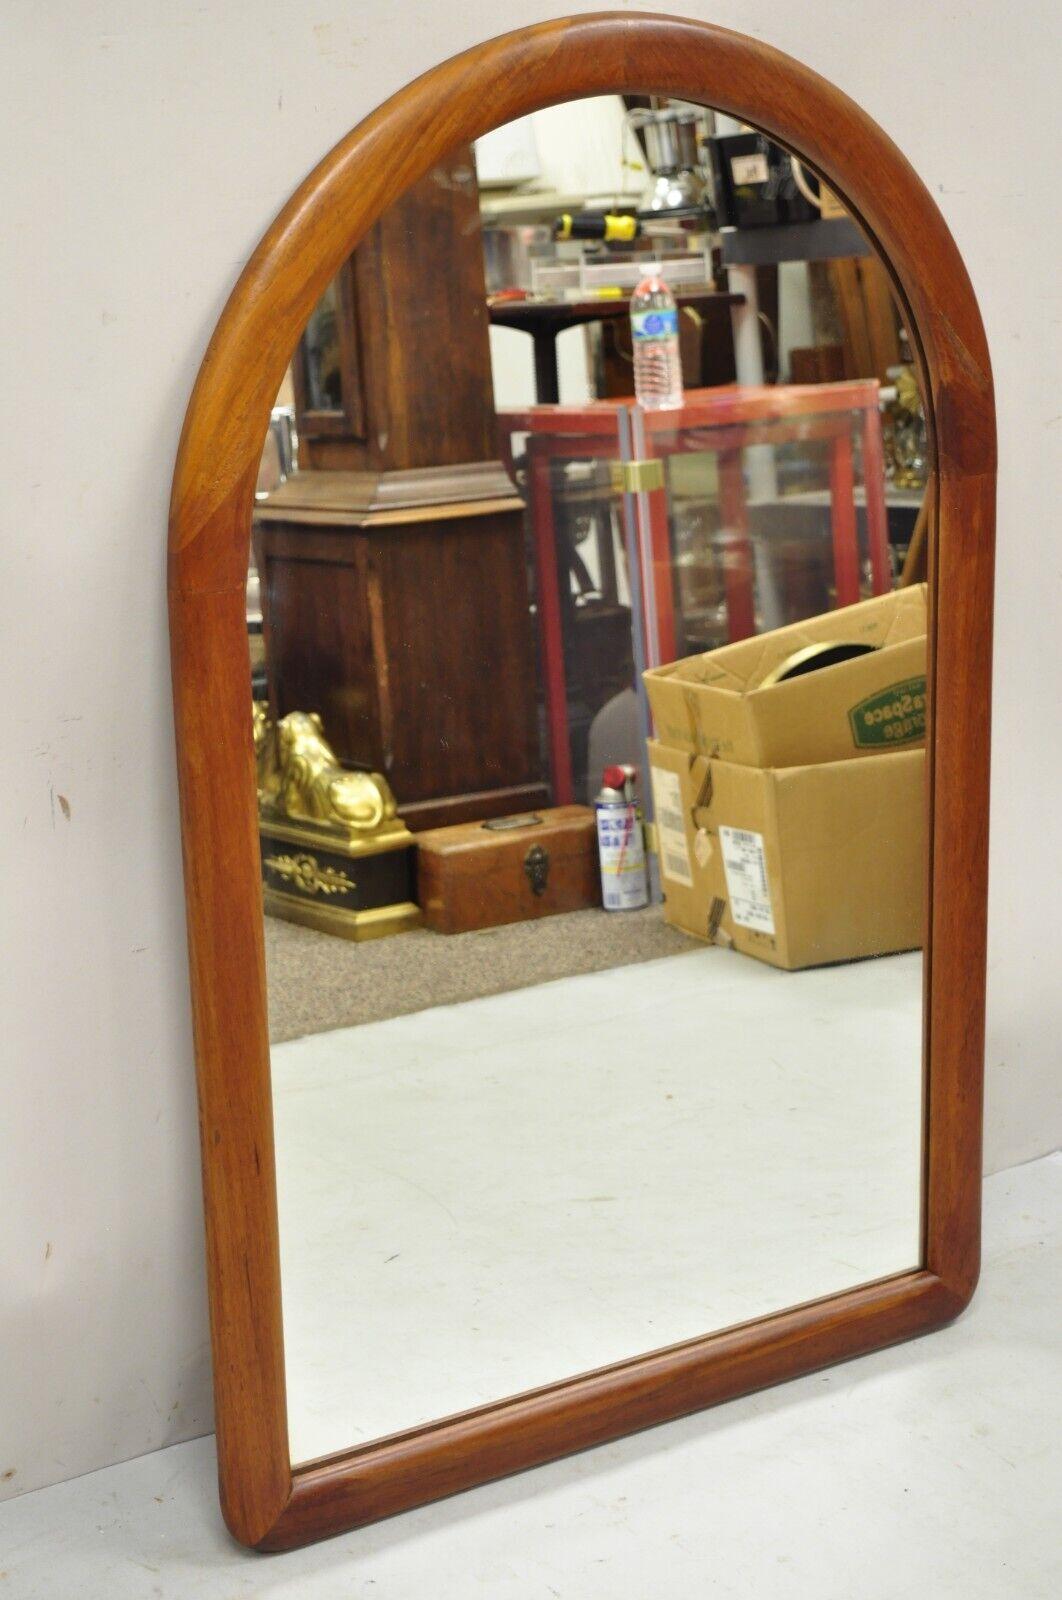 Vintage Mid-Century Modern Danish style teak wood arched mirror by Lenoir. Item features solid teak frame, original stamp, very nice vintage item, clean modernist lines, great style and form. Circa mid 20th century. Measurements: 42